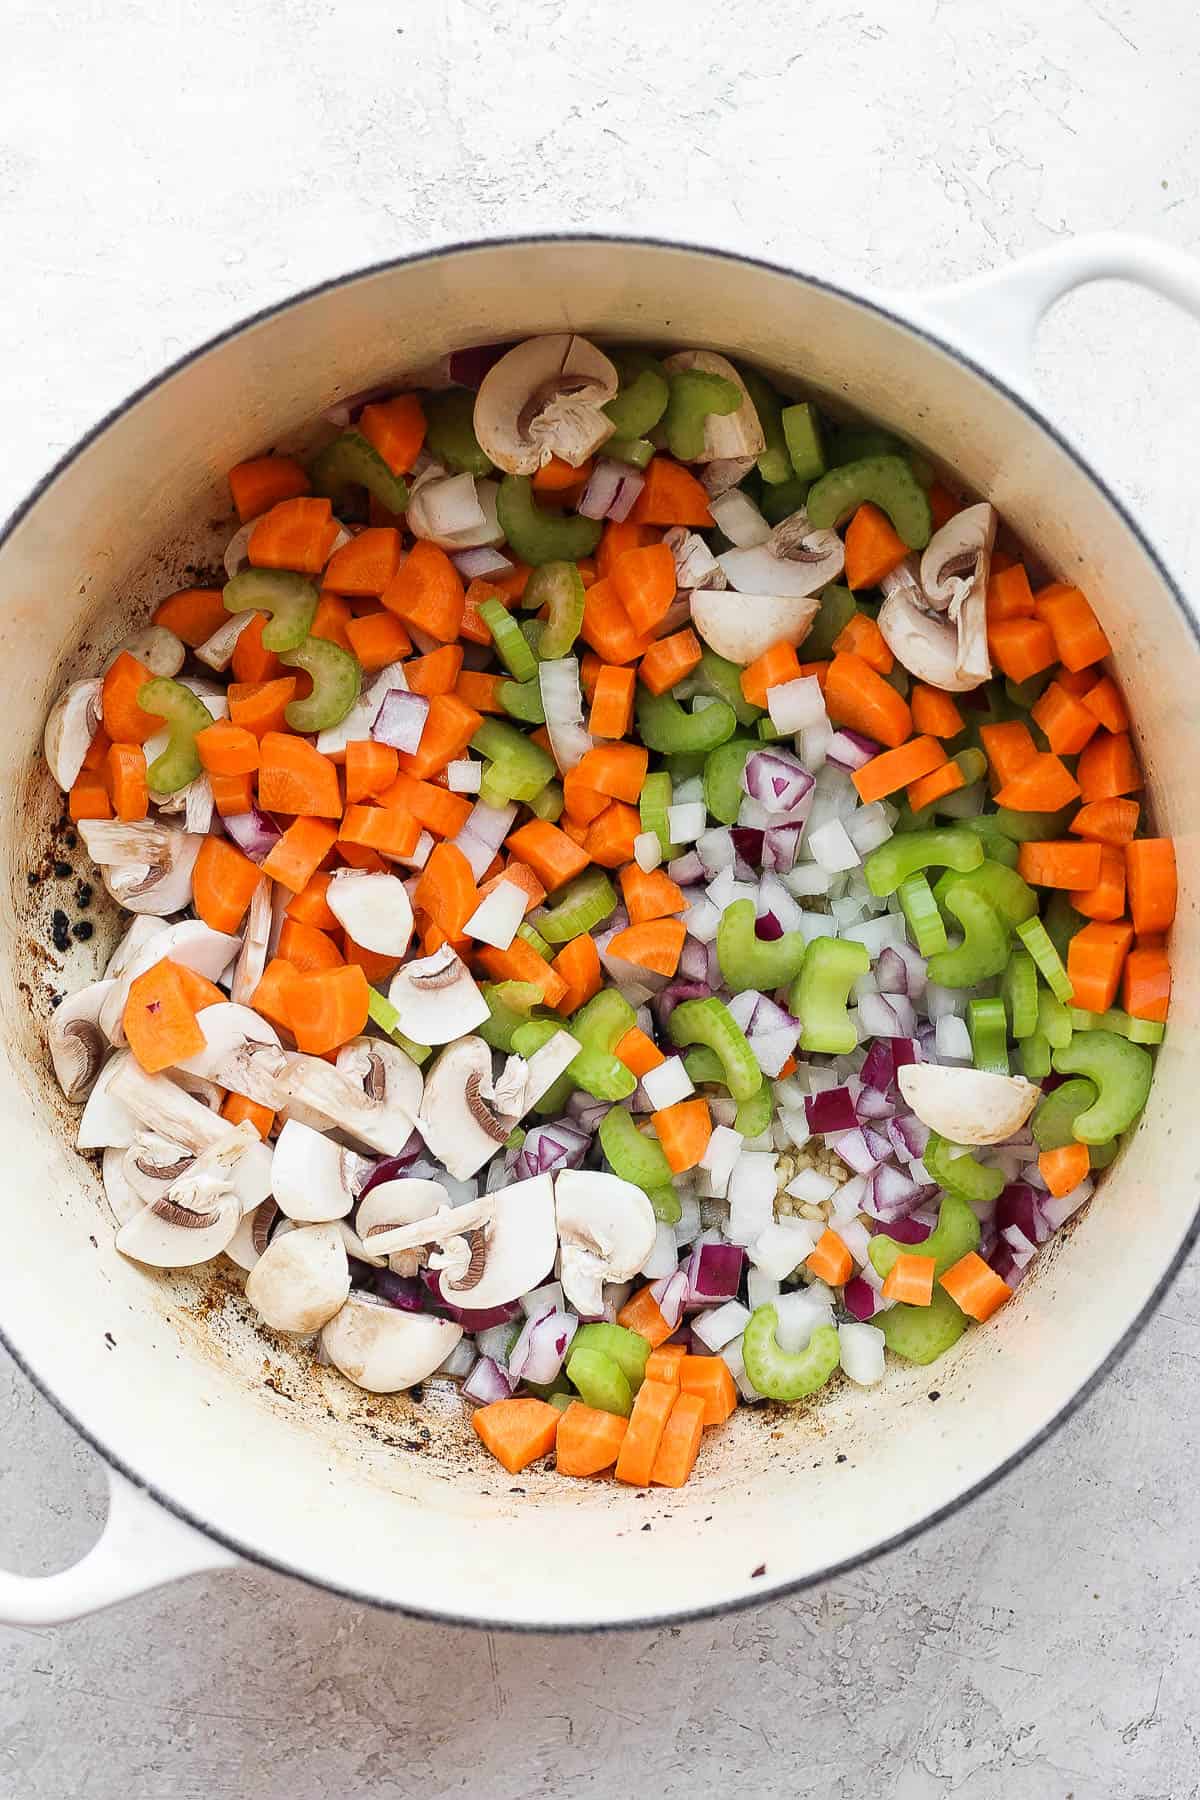 A dutch oven with all the cut-up vegetables in it.